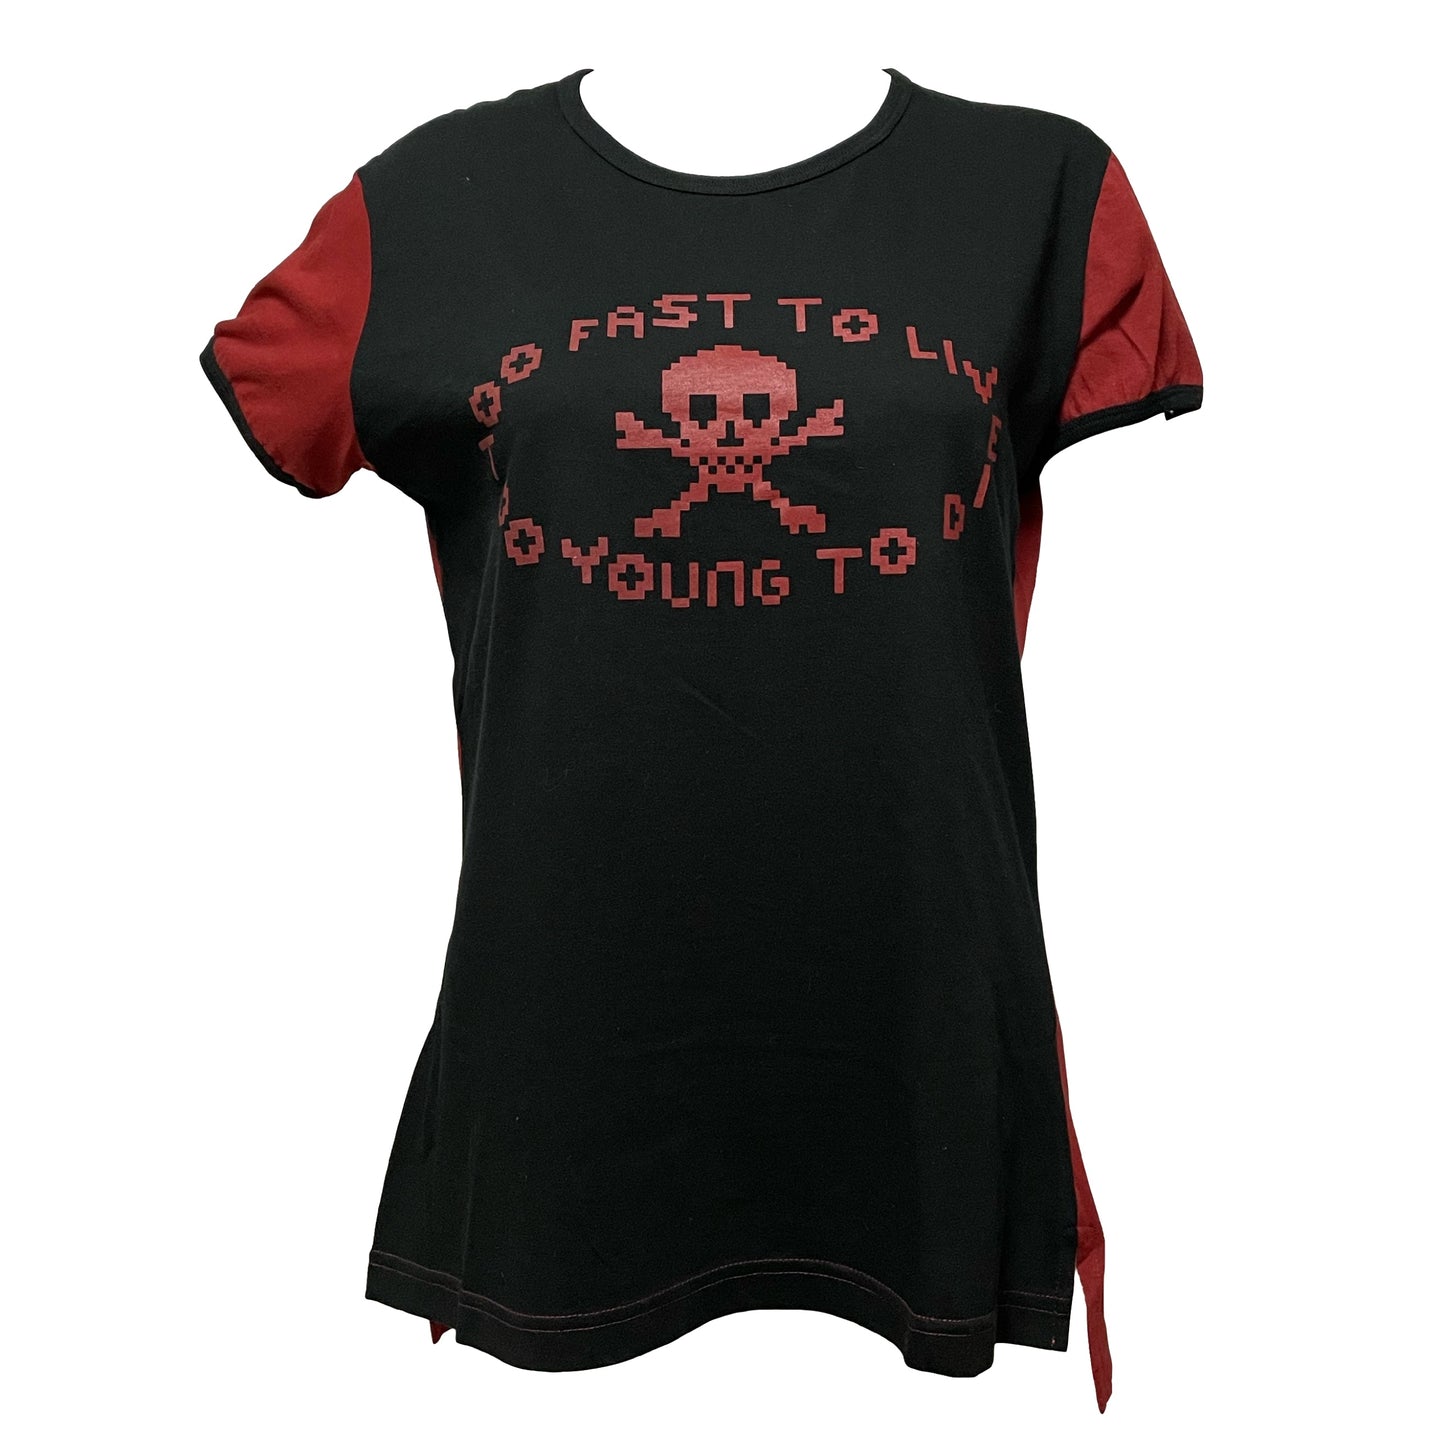 VIVIENNE WESTWOOD "Too Fast to Live, Too Young to Die" Digital Skull T-Shirt